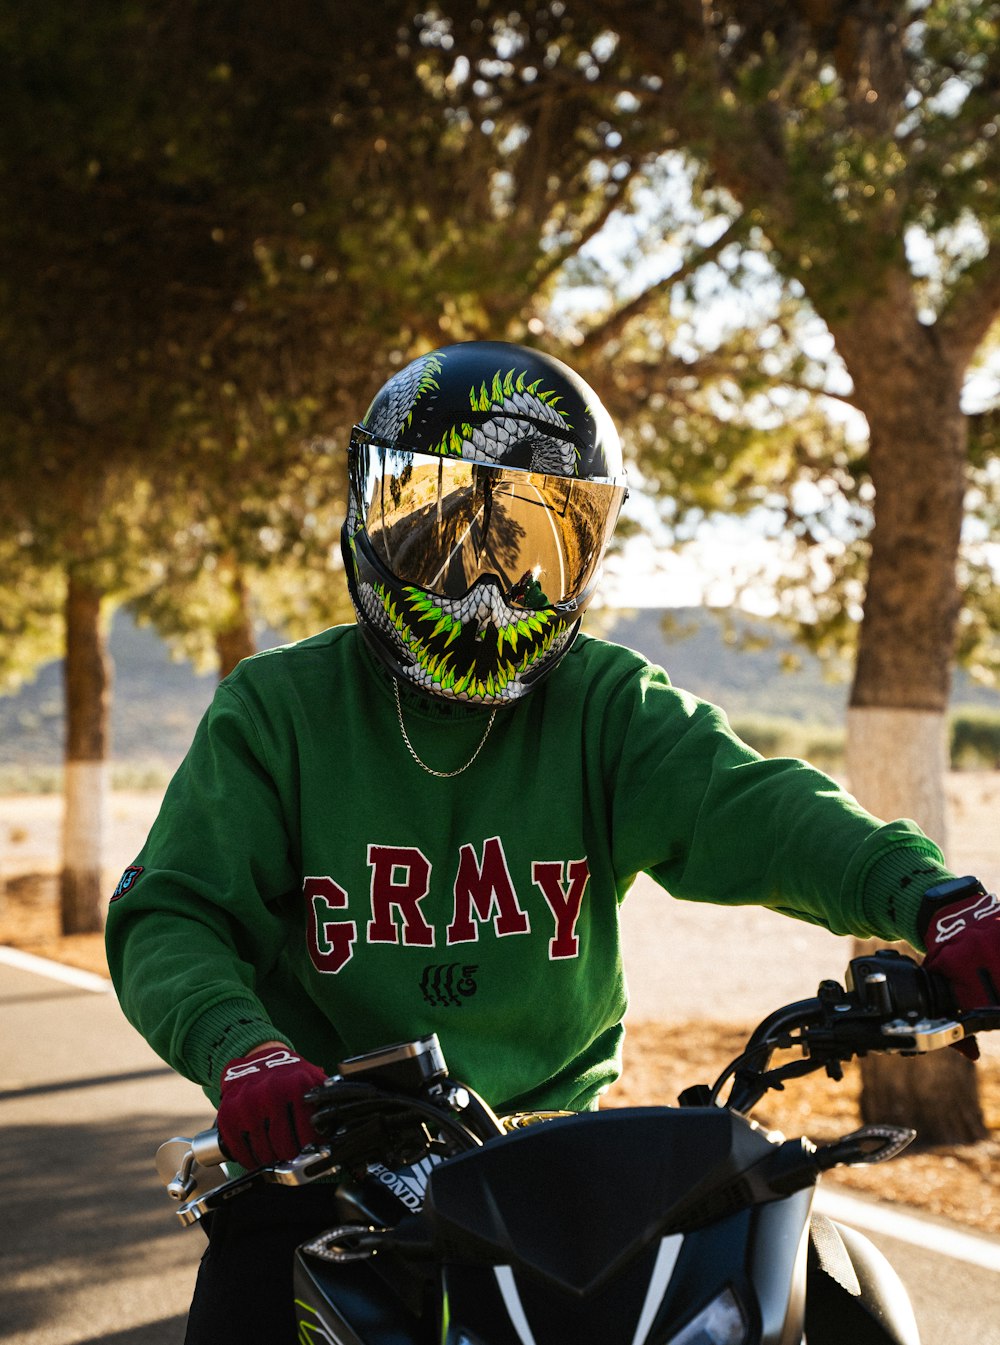 a man in a green shirt is riding a motorcycle